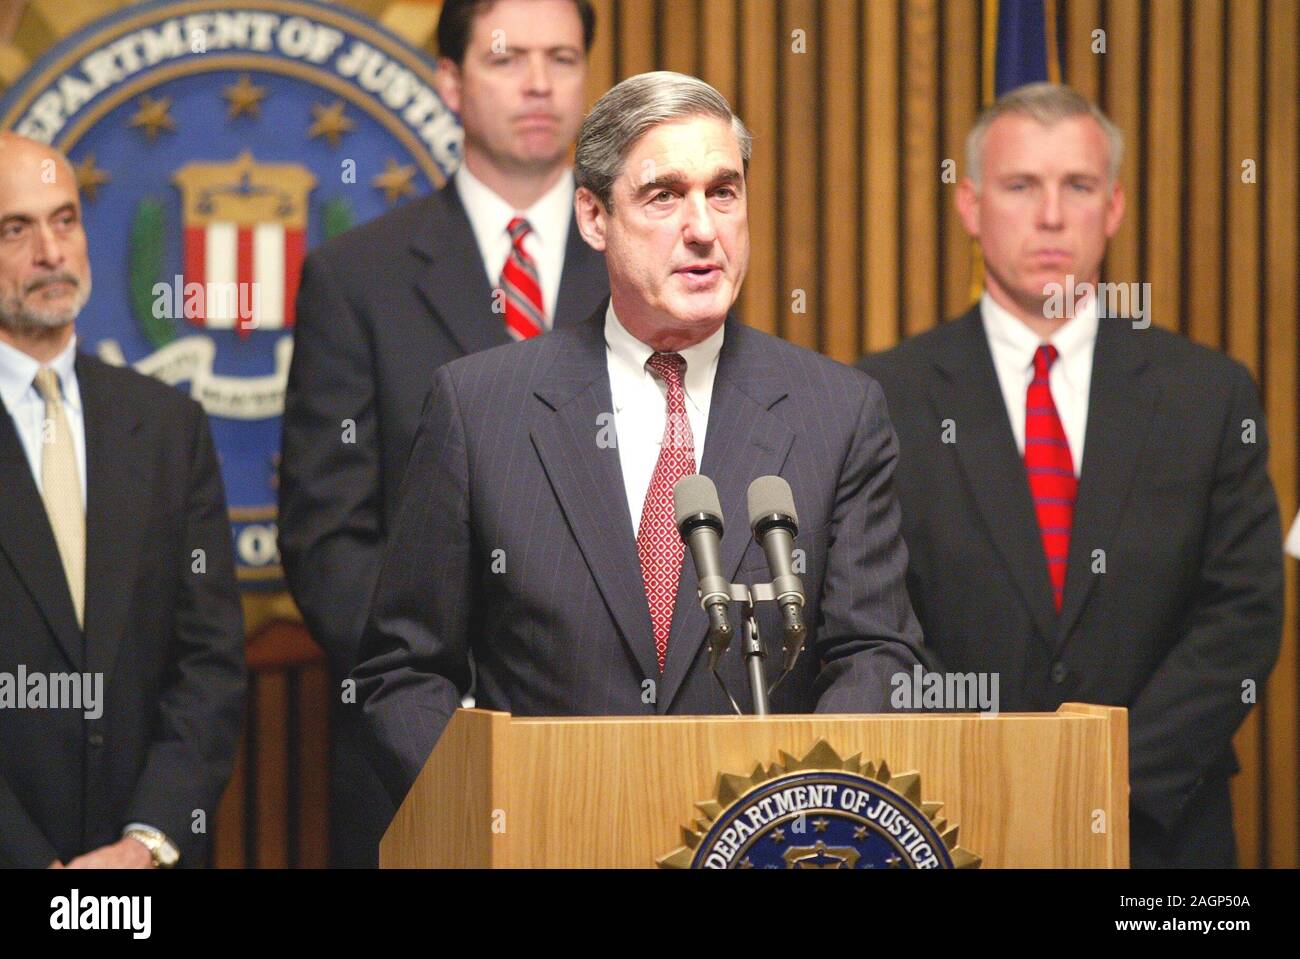 Robert Mueller, FBI Director. The Federal Bureau of Investigation (FBI) is the domestic intelligence and security service of the United States and its principal federal law enforcement agency. Operating under the jurisdiction of the United States Department of Justice, the FBI is also a member of the U.S. Intelligence Community and reports to both the Attorney General and the Director of National Intelligence. A leading U.S. counter-terrorism, counterintelligence, and criminal investigative organization, the FBI has jurisdiction over violations of more than 200 categories of federal crimes. Stock Photo